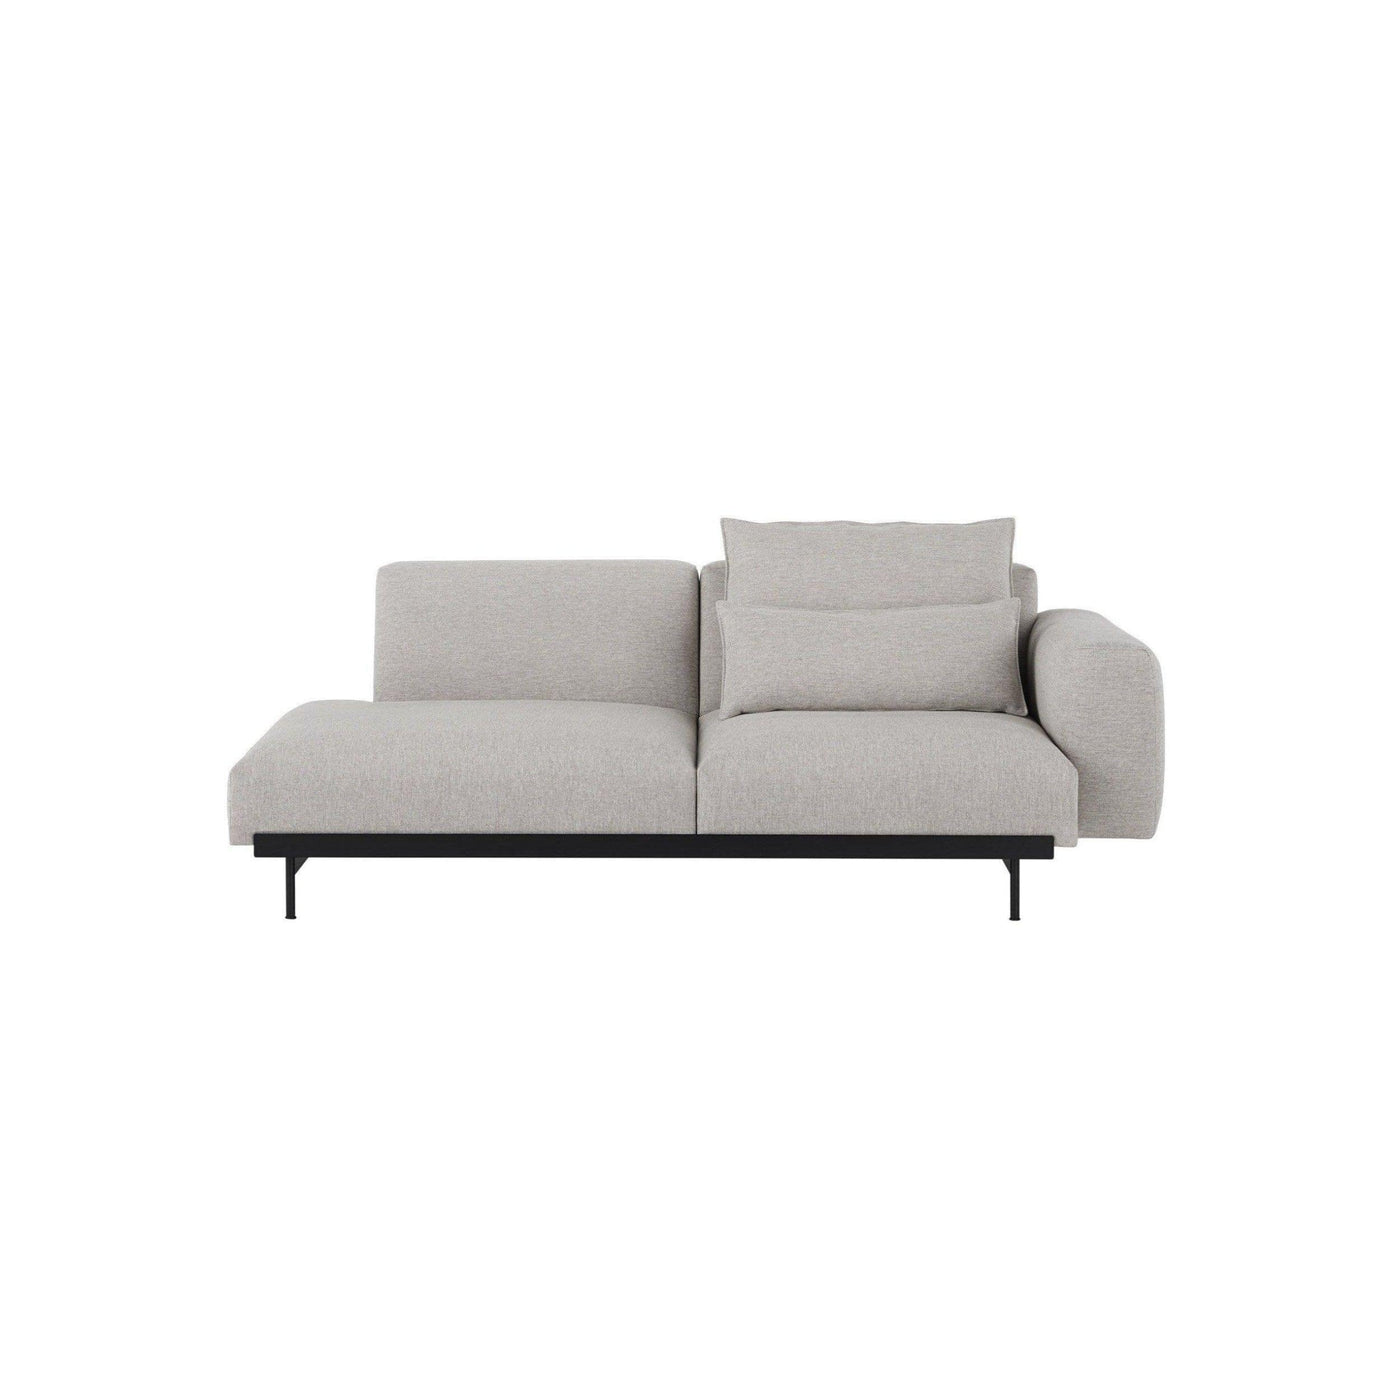 Muuto In Situ Modular 2 Seater Sofa, configuration 2 in clay 12 fabric. Made to order from someday designs #colour_clay-12